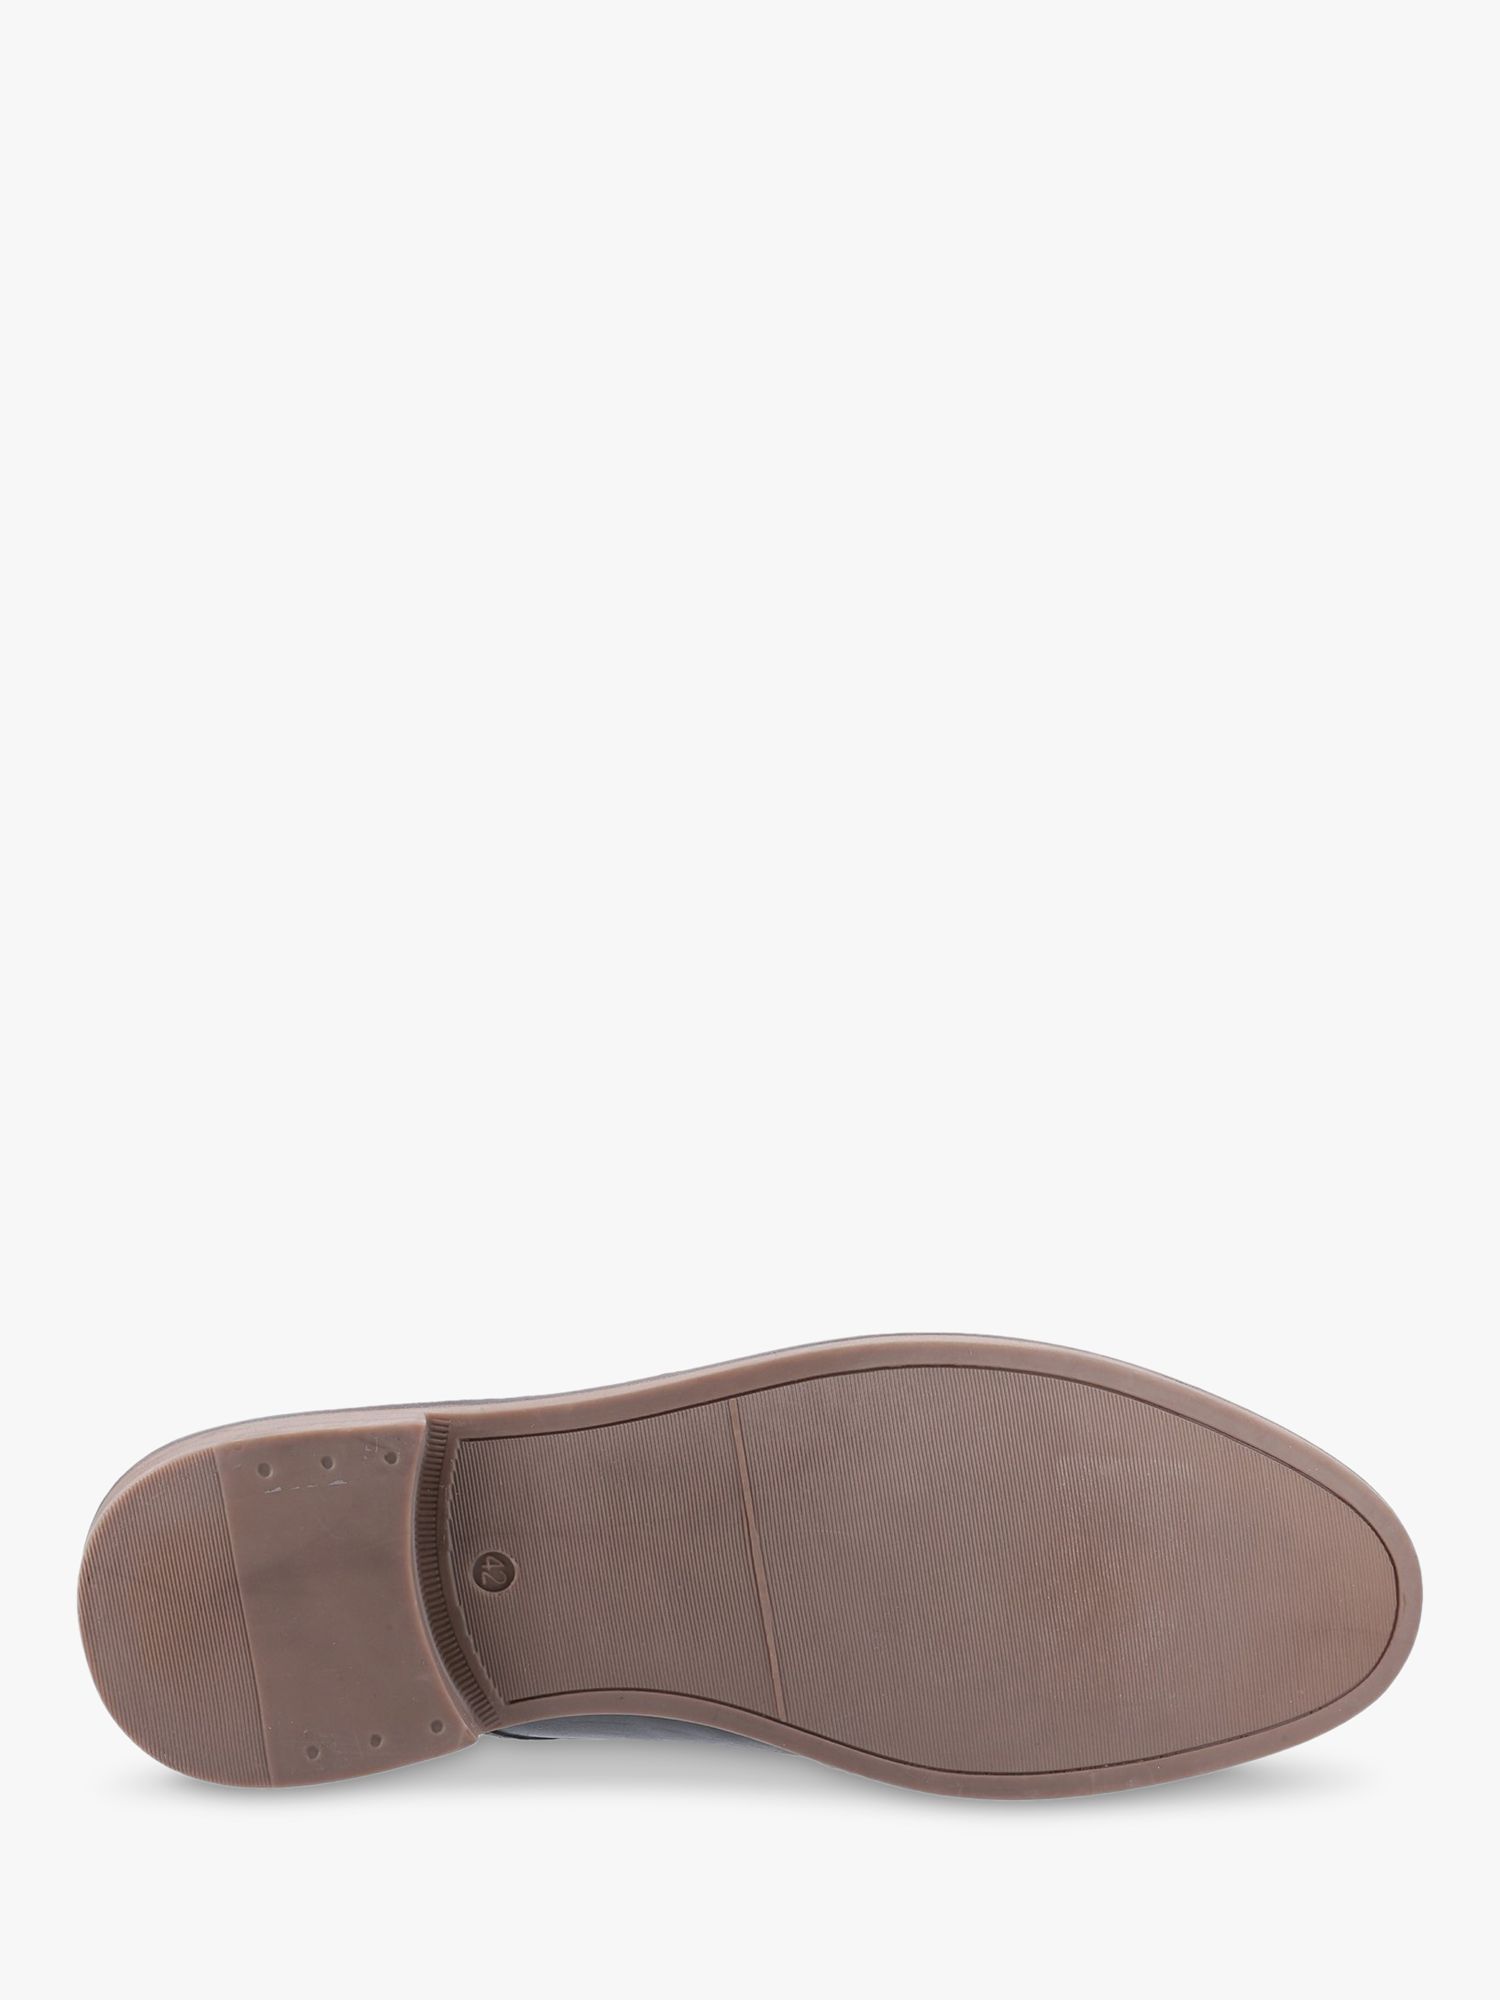 Hush Puppies Brayden Leather Derby Shoes, Brown at John Lewis & Partners